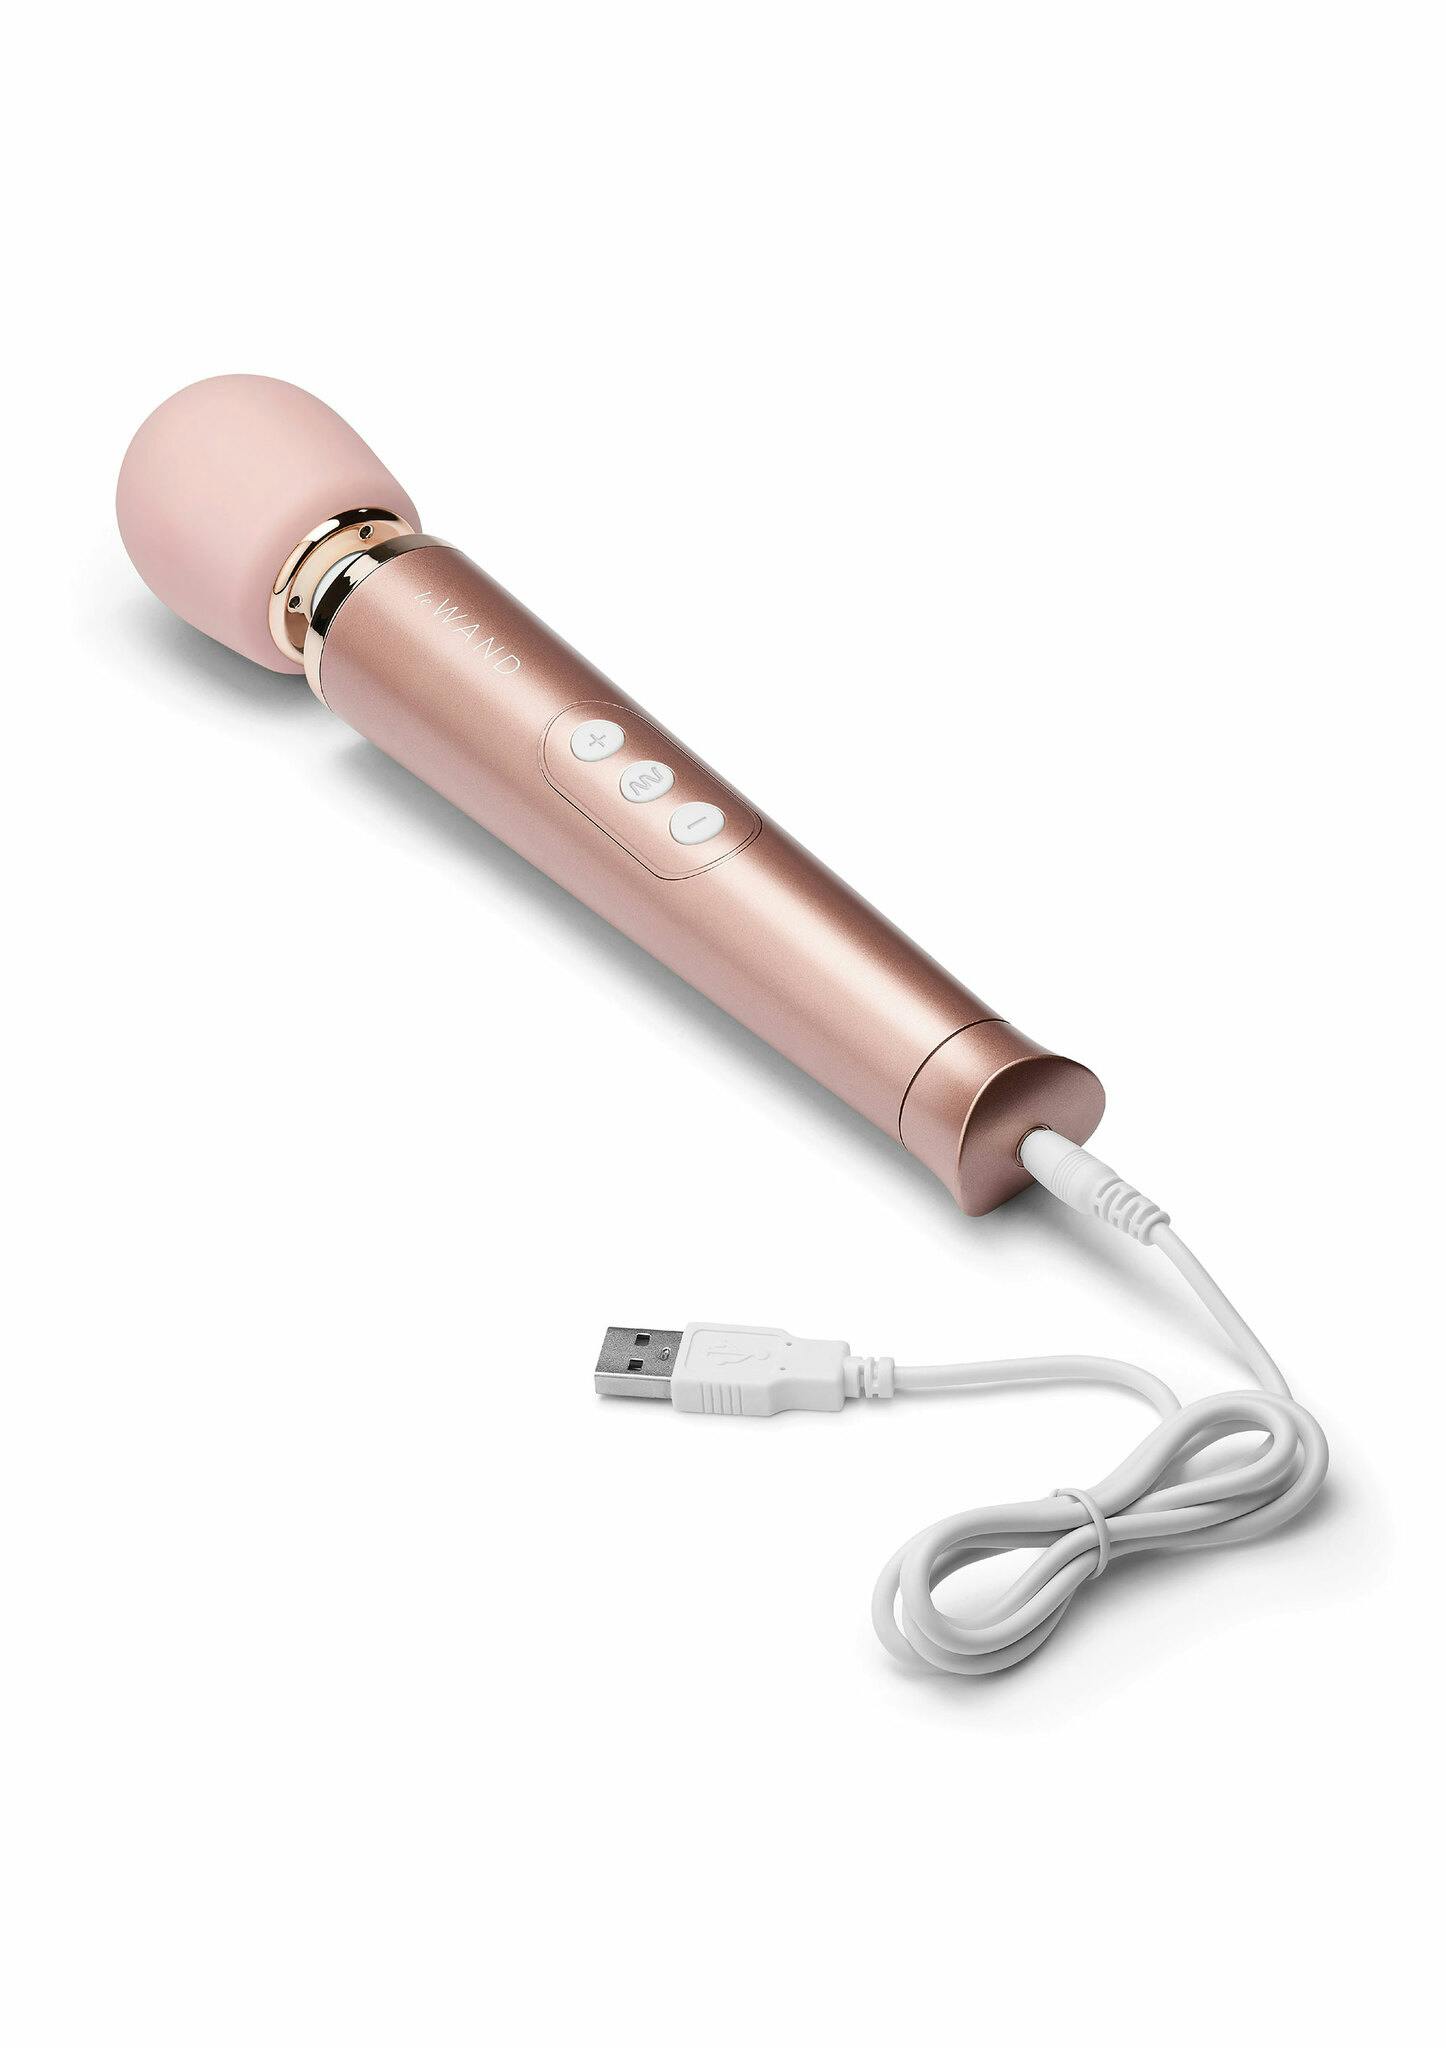 Le Wand Petite Rechargeable, Rose gold